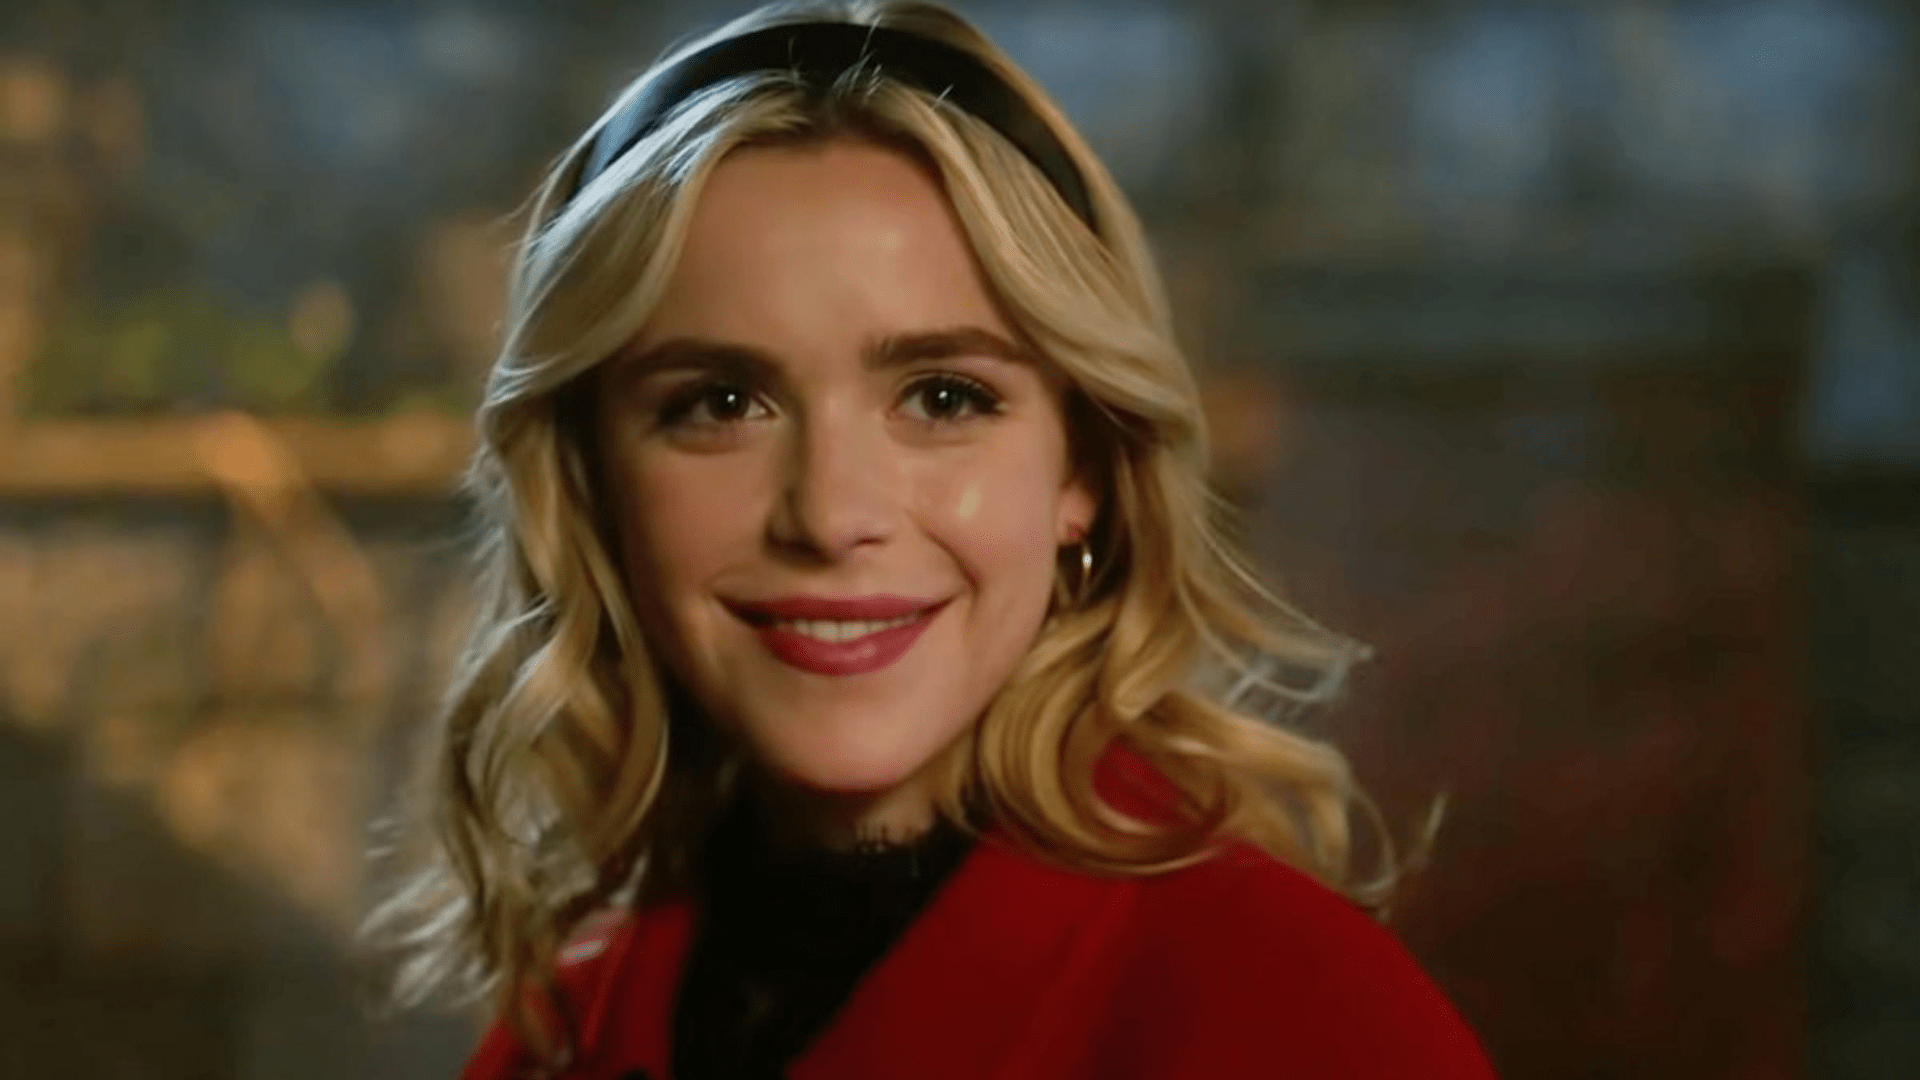 Chilling Adventures Of Sabrina Facts - 51 Chilling Adventures Of Sabrina Facts Every Netflix Fan Should Know